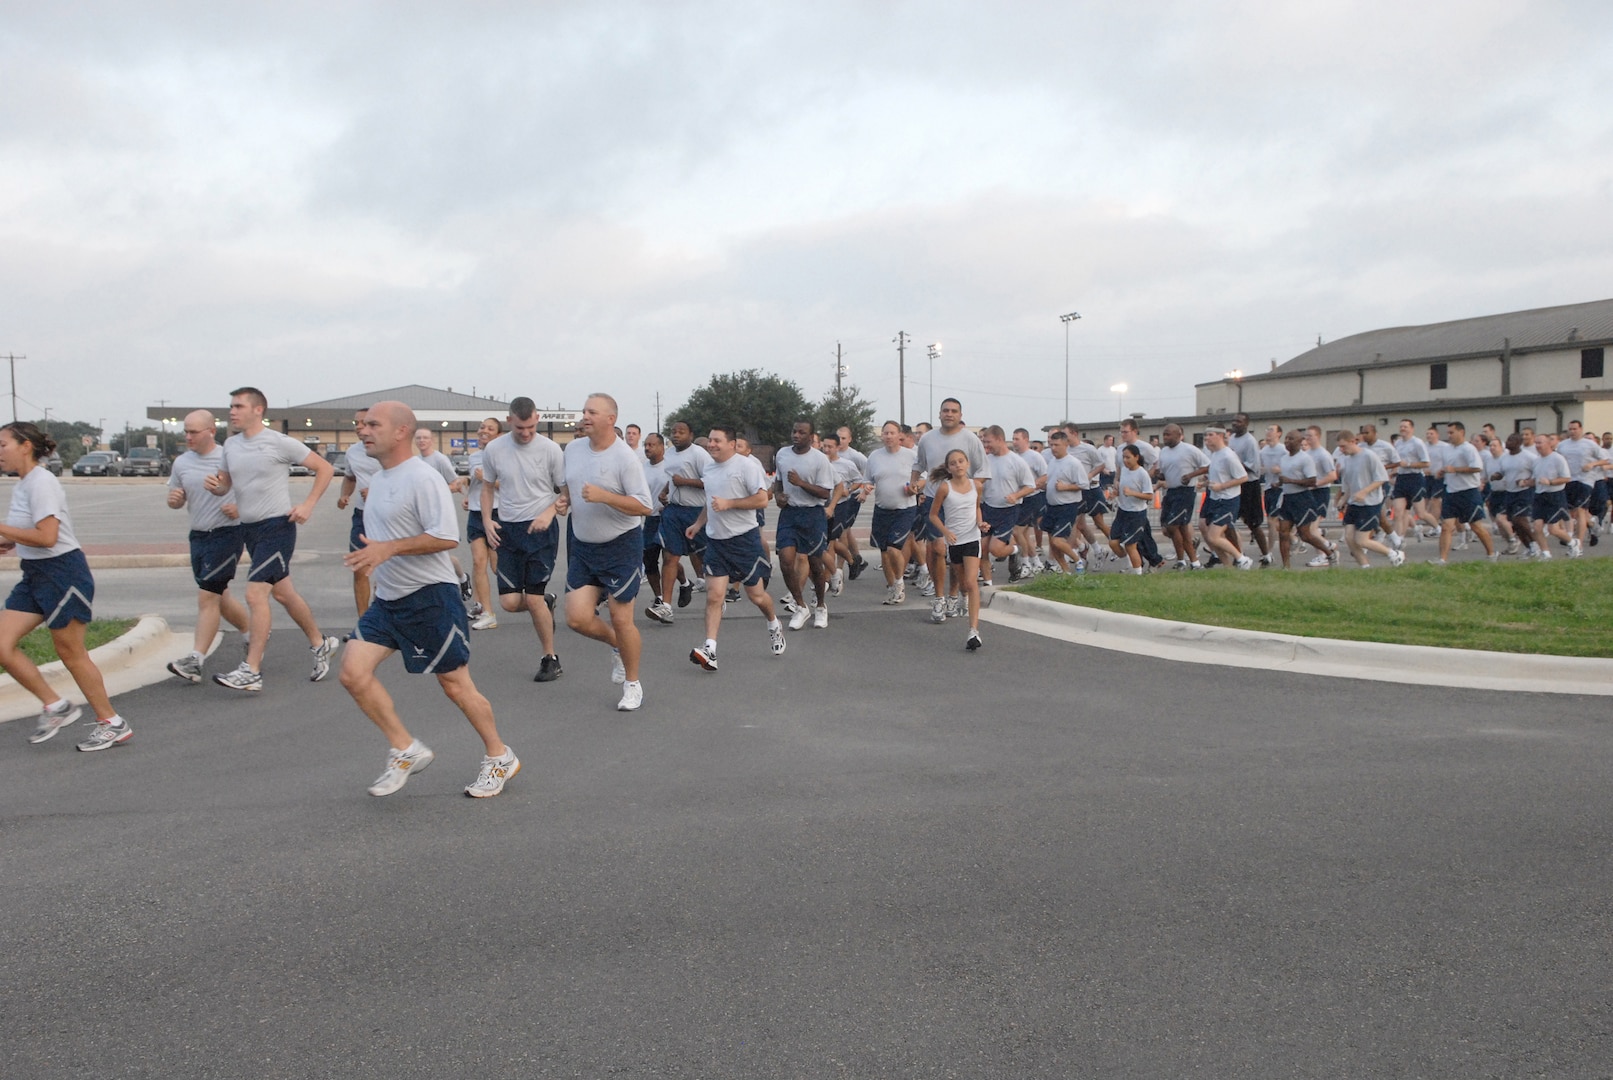 Members of Team Lackland enjoy the Bang for your Buck Family Fun Run held July 11. The fun runs are one of many ways that Lackland's sports and fitness program promotes fitness on base. The program recently received the Air Education and Training Command Fitness and Sports Program of the Year award for their efforts. (USAF photo by Alan Boedeker)